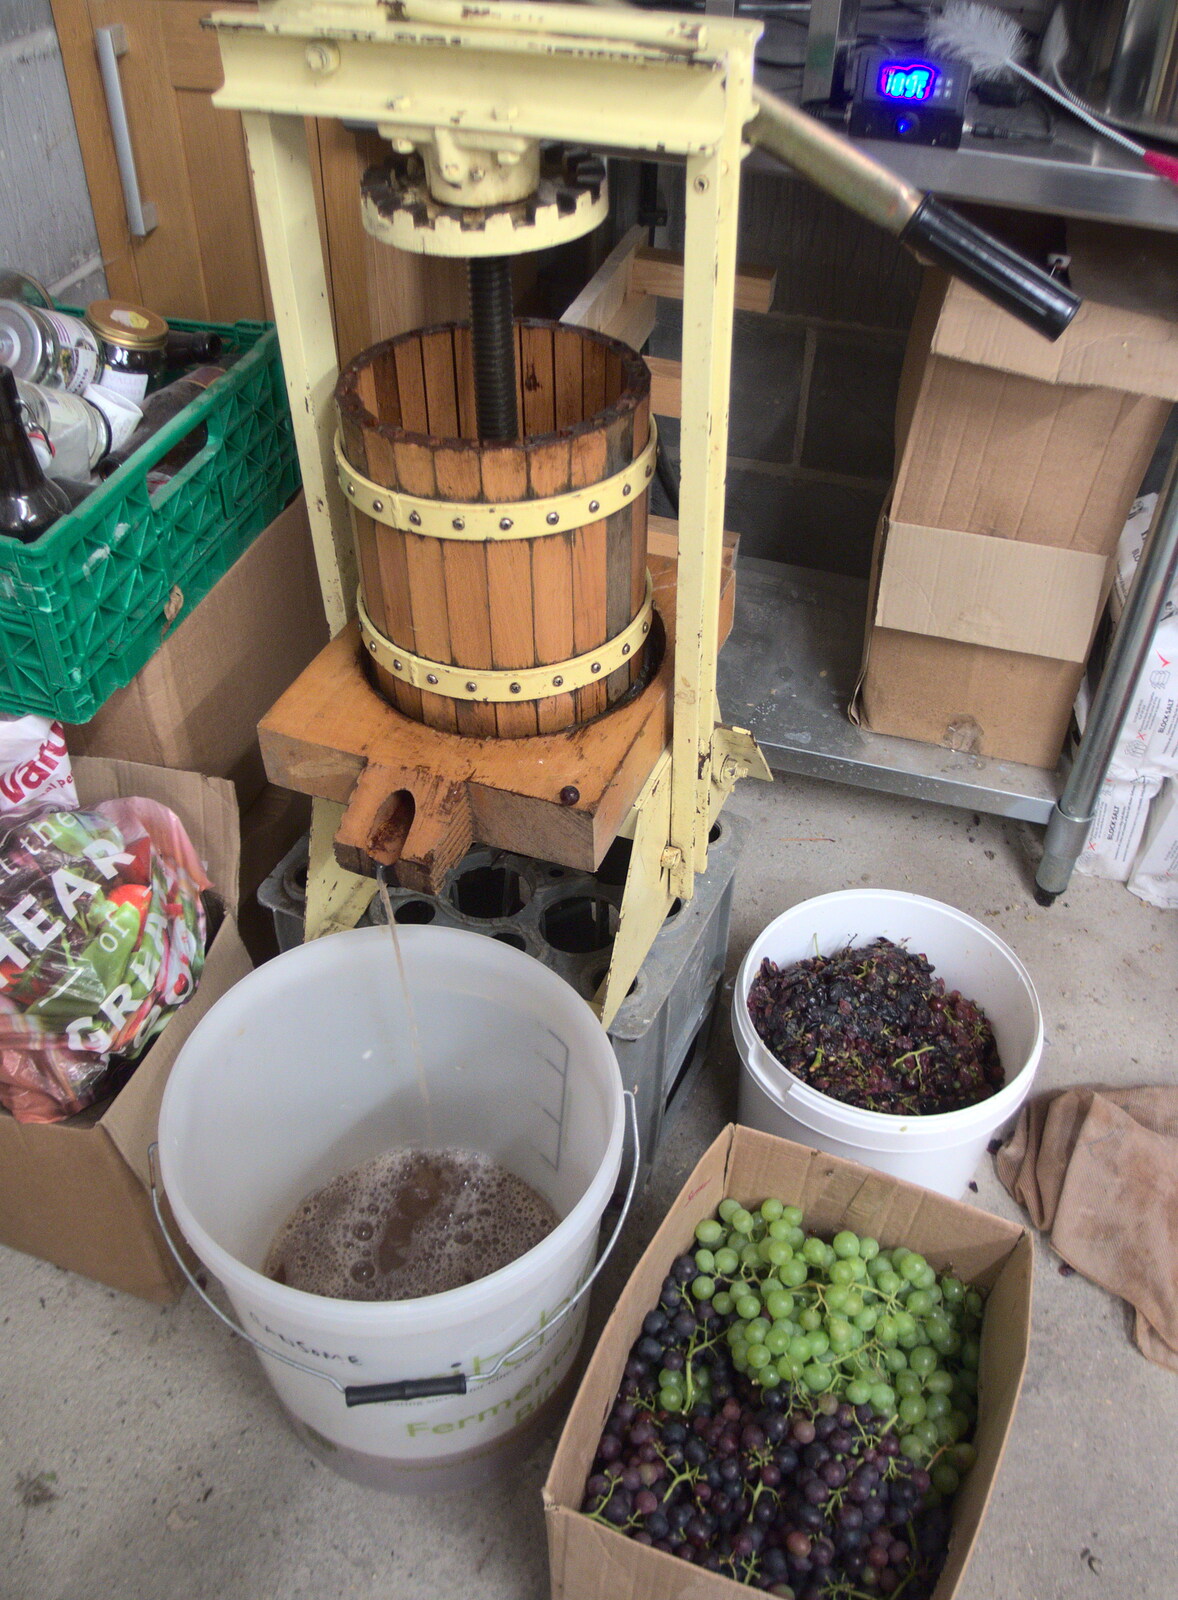 Nosher has a go at making some wine from garden grapes from A Miscellany, Norwich , Norfolk - 30th September 2018